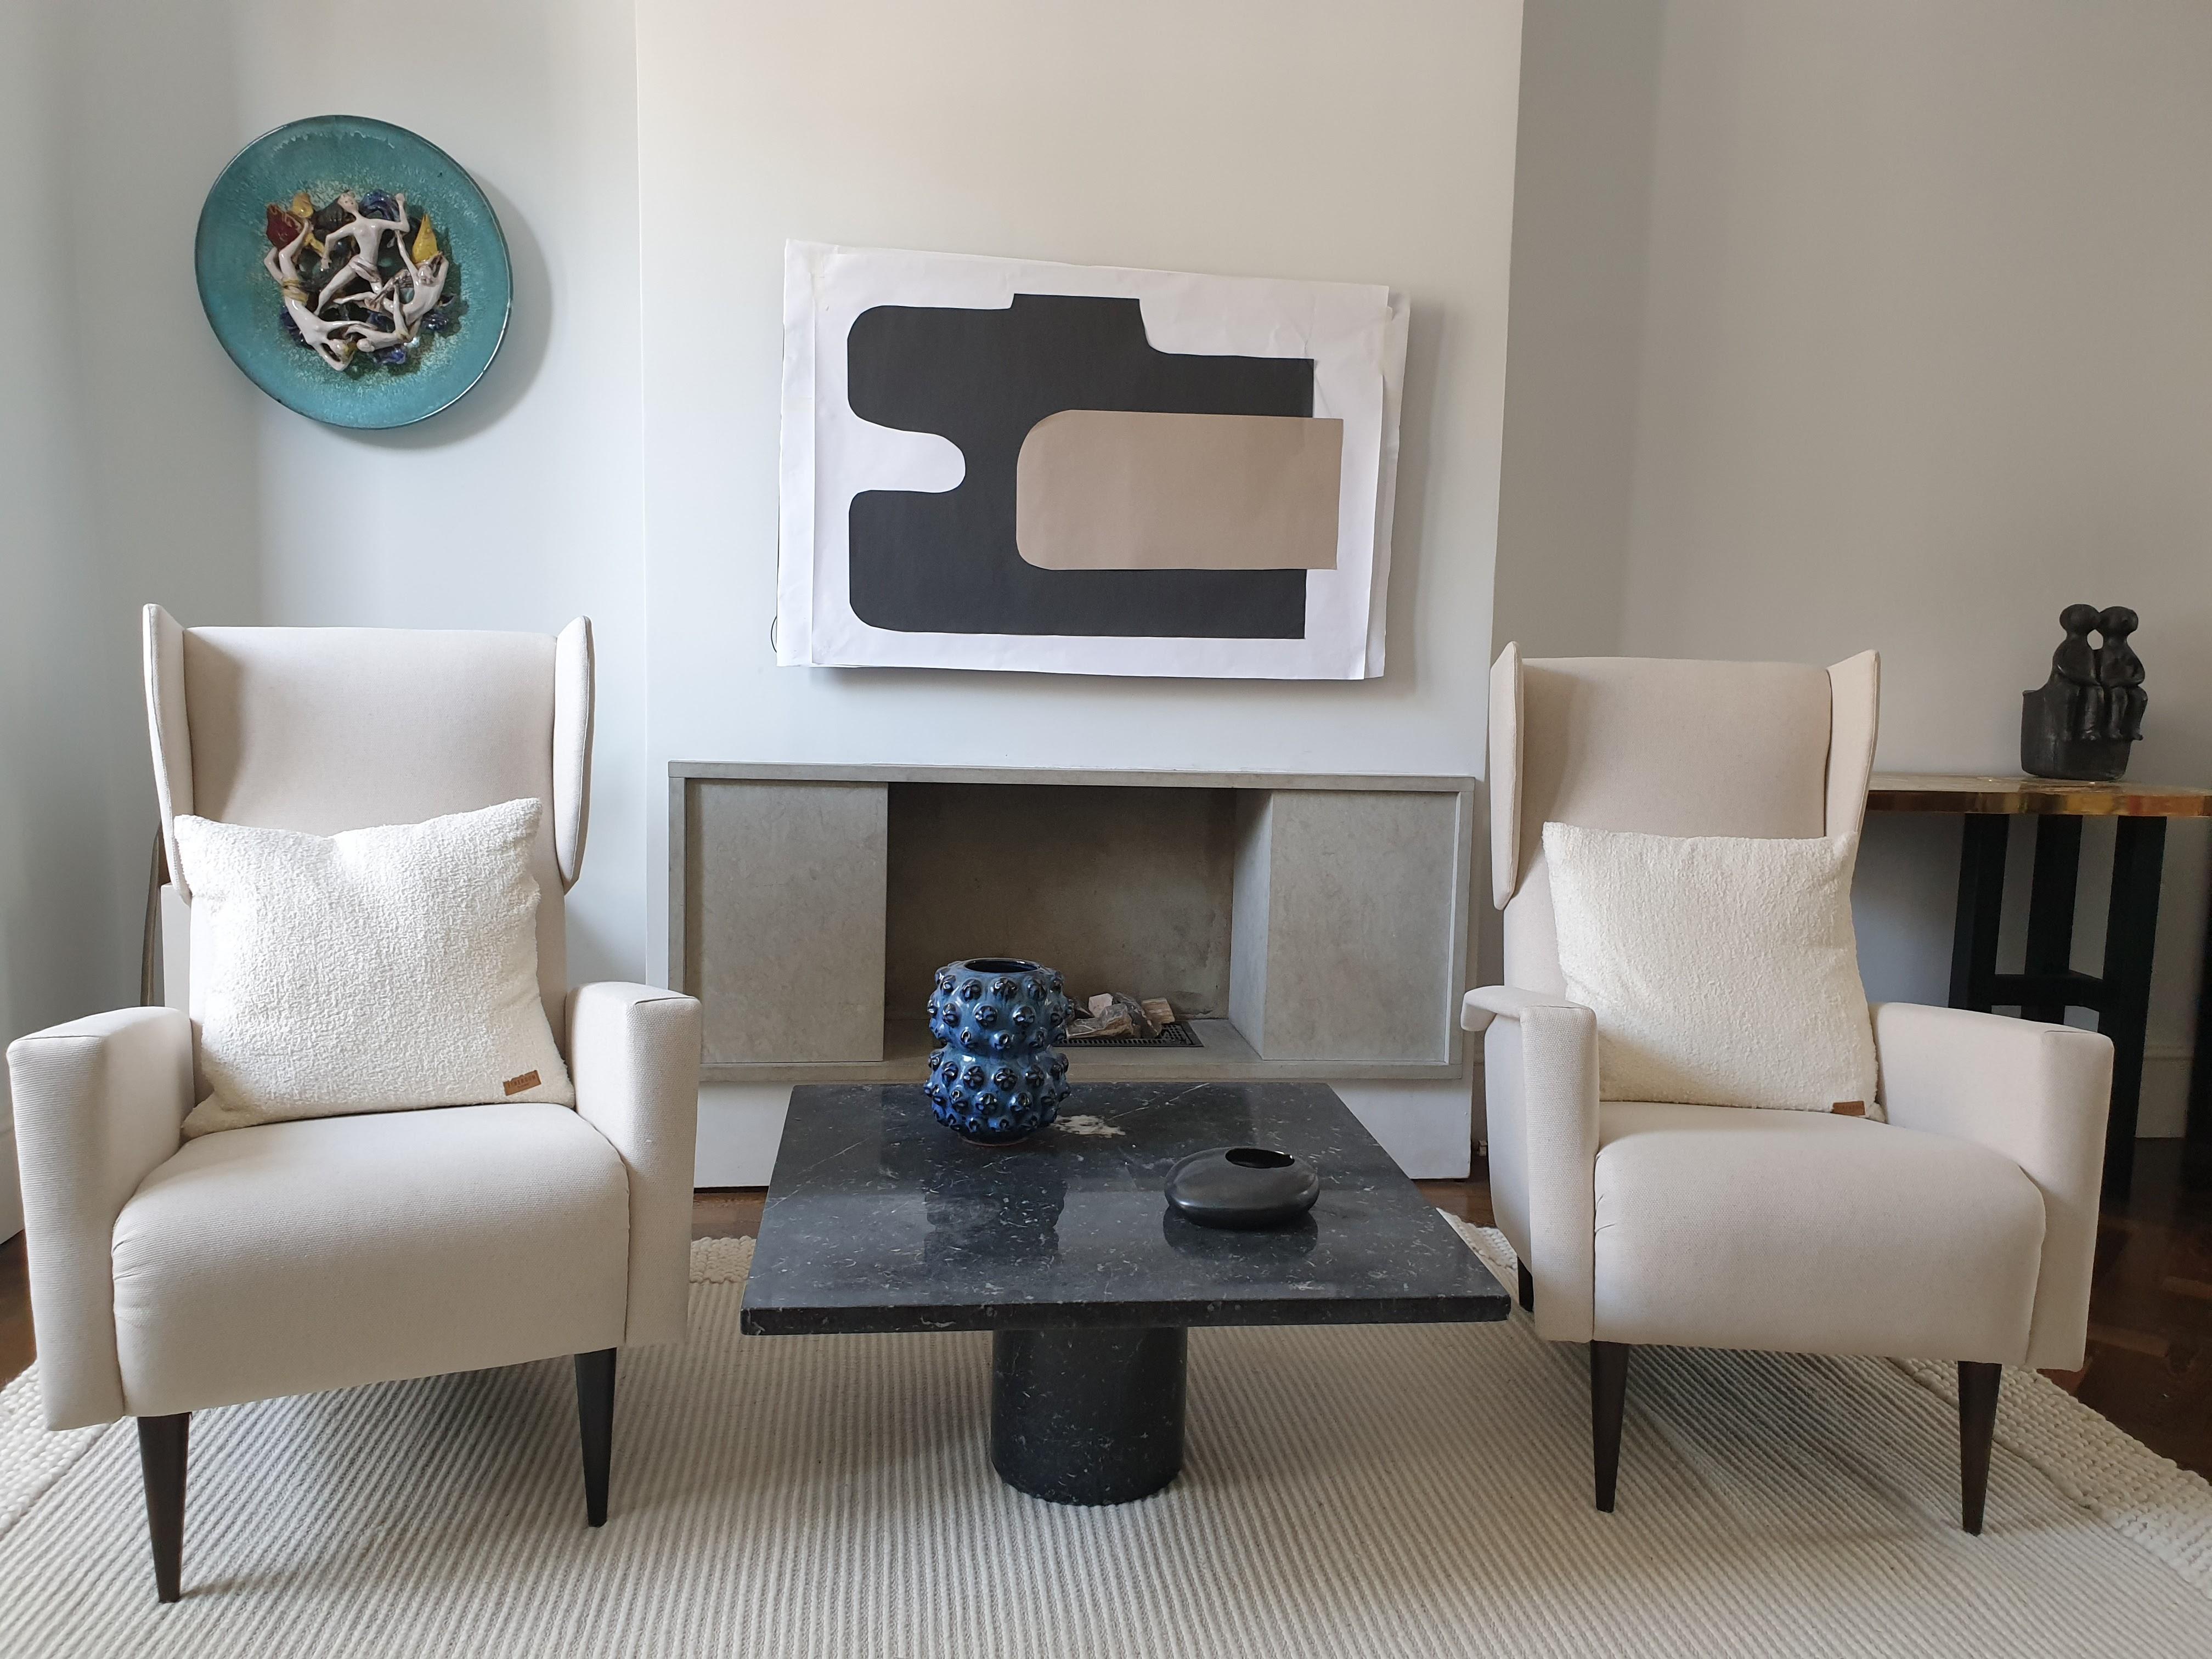 Pair of substantial wing chairs attributed to Gio Ponti. These armchairs have high backs with stylish wings and polished wooden legs. They have been reupholstered in off white linen. These well scaled chairs would grace both aperiod and more